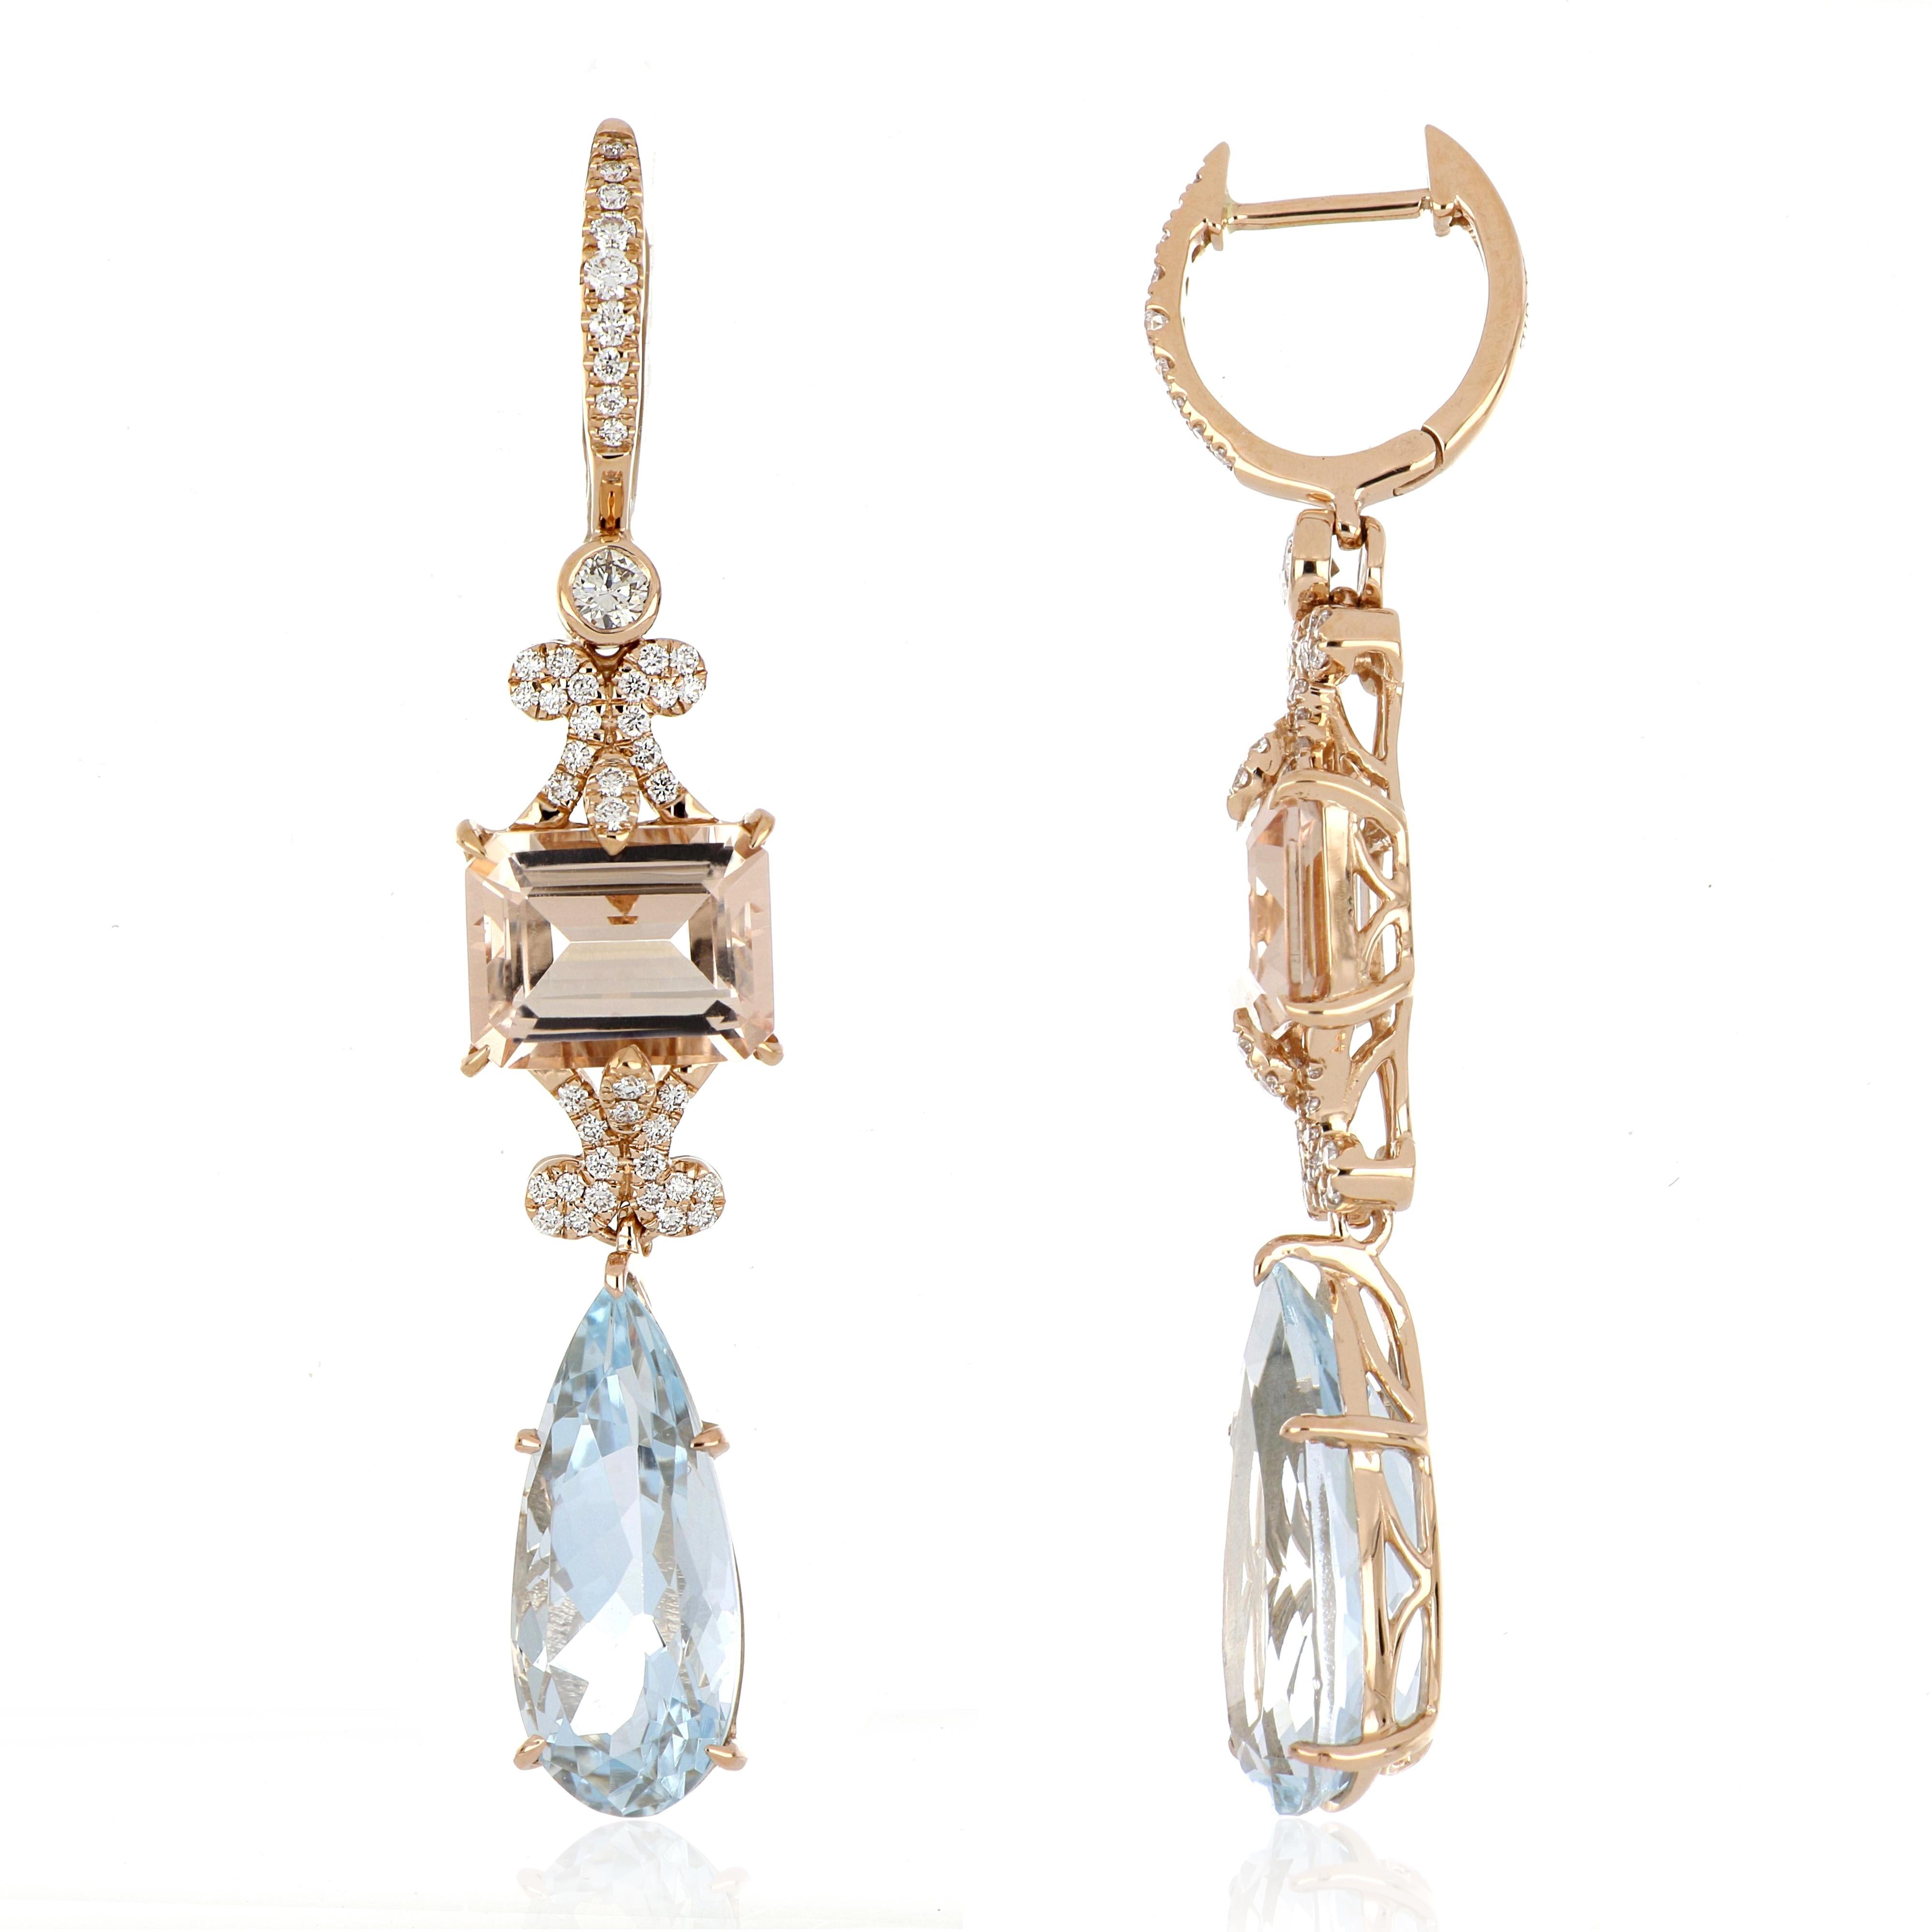 Elegant and Exquisitely detailed Mismatched Dangling Gold Earrings, set with 6.70 Ct (total ) Aquamarine, 4.10 Cts (total)  Morganite, accented with micro pave Diamonds, weighing approx. 0.47 Cts. total carat weight. Beautifully Hand crafted in 18